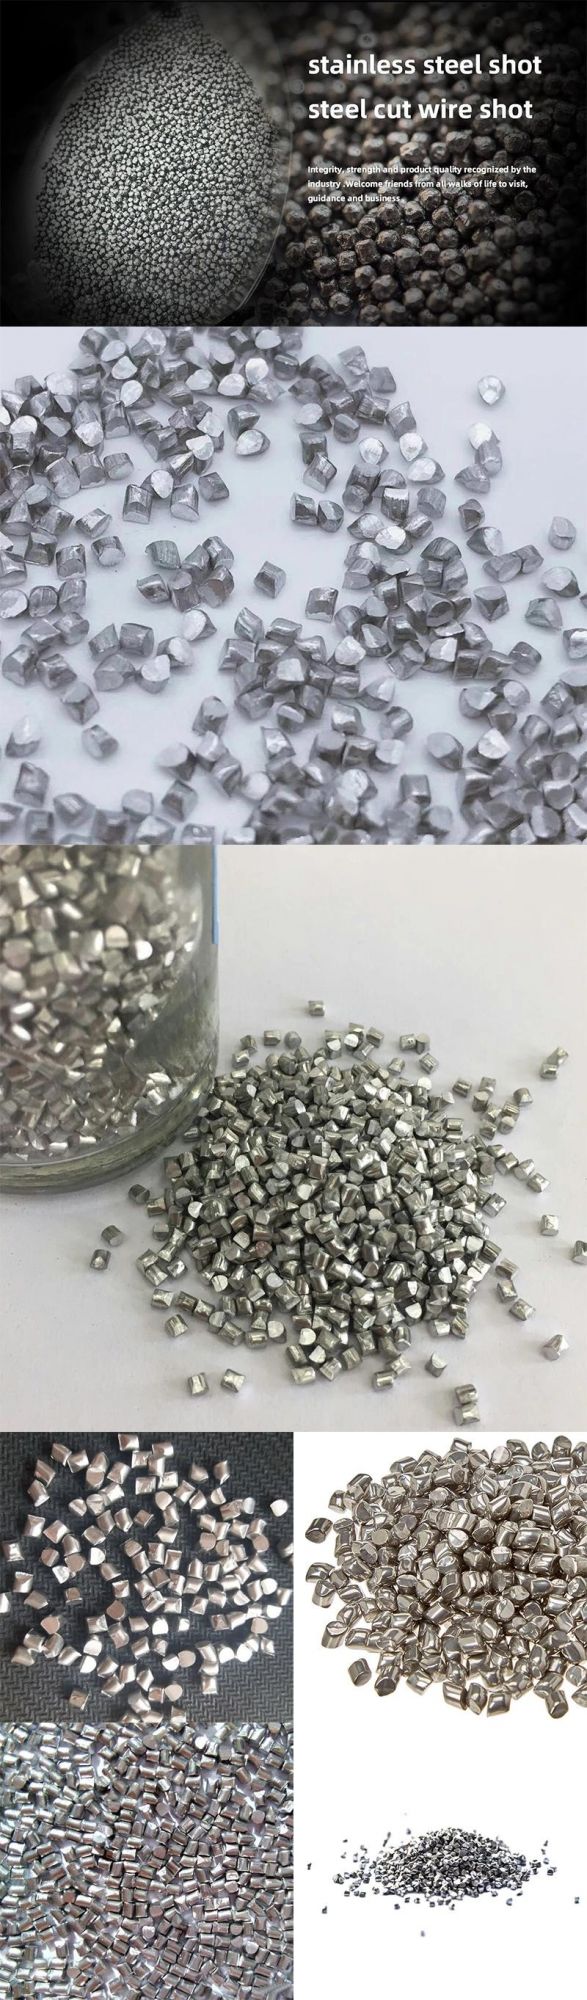 Aluminum Shot, Aluminum Cut Wire Shot, Aluminum Grain with Low Price